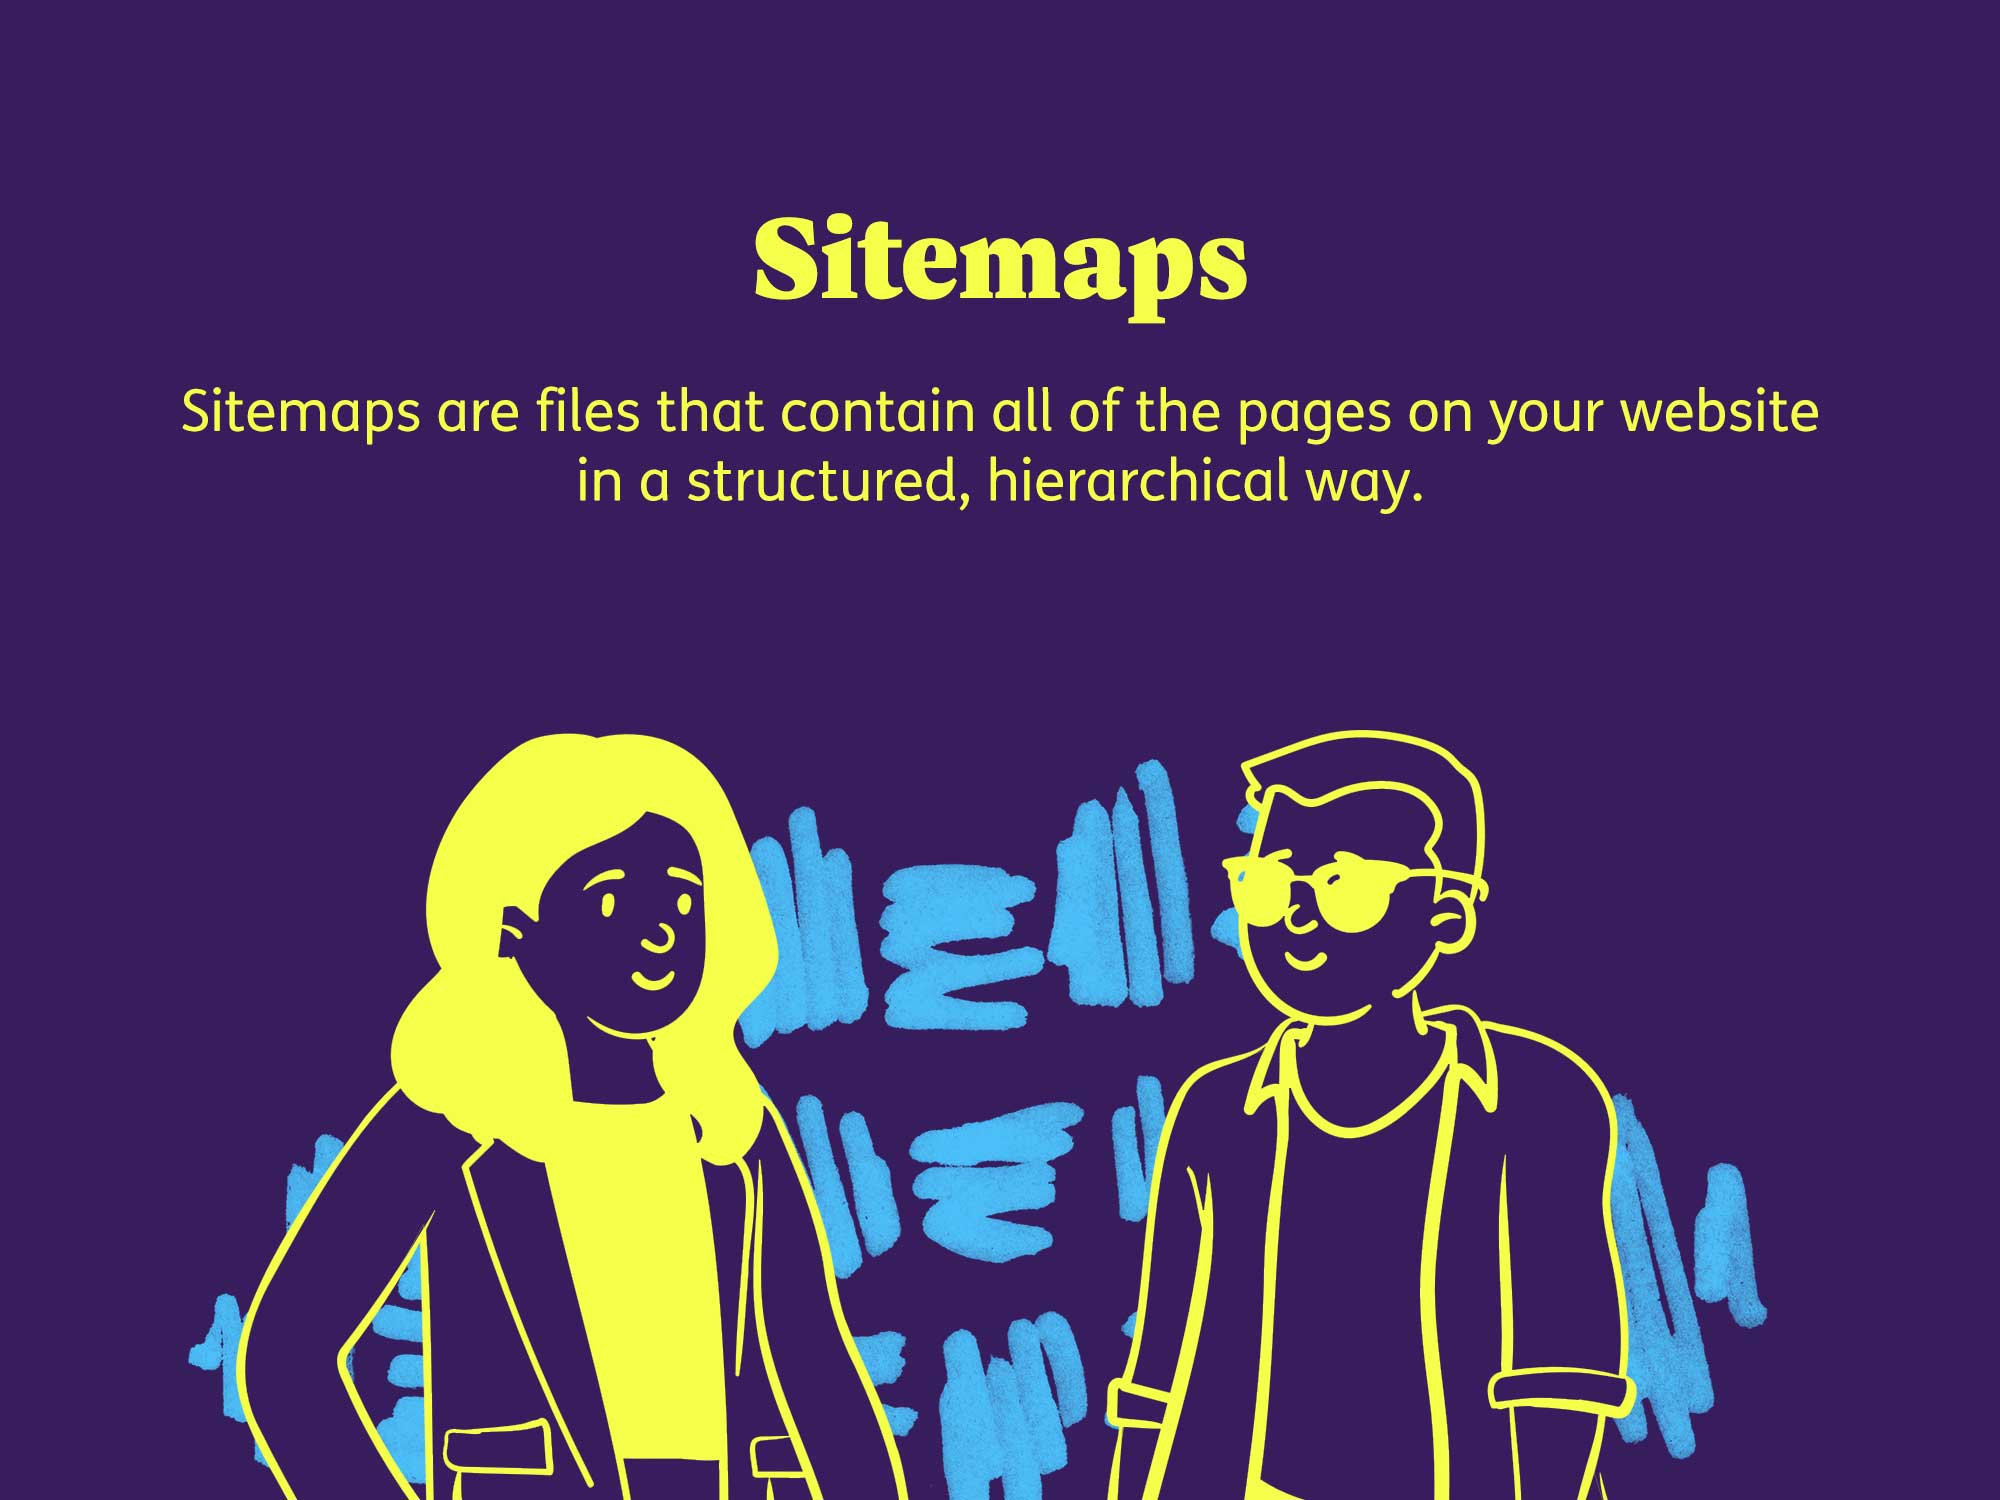 Sitemaps are files that contain all of the pages on your website in a structured, hierarchical way.